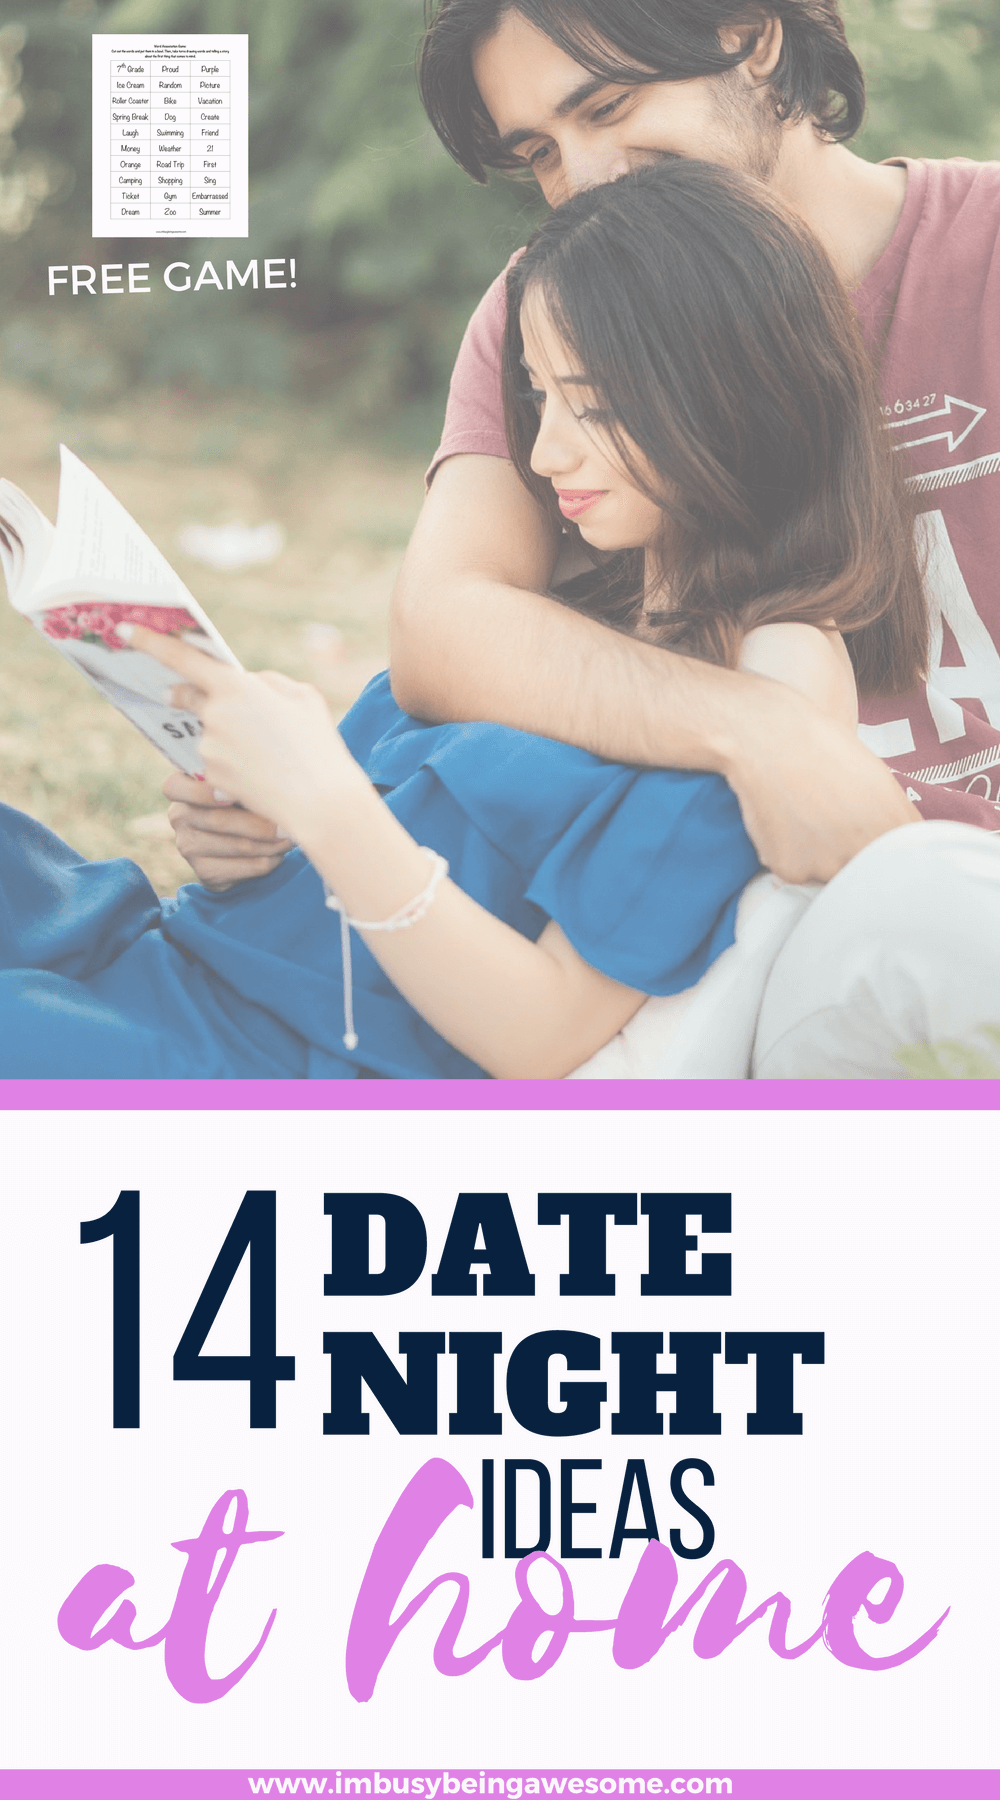 14 Ideas For Date Night At Home. Date, Frugal, Cheap, Budget, Stay Home, Easy, Fun, Couple, Valentine's Day, Anniversary, Happiness, Love #Date #Frugal #Cheap #Budget #StayHome #Easy #Fun #Couple #ValentinesDay #Anniversary #Happiness #Love #Valentine